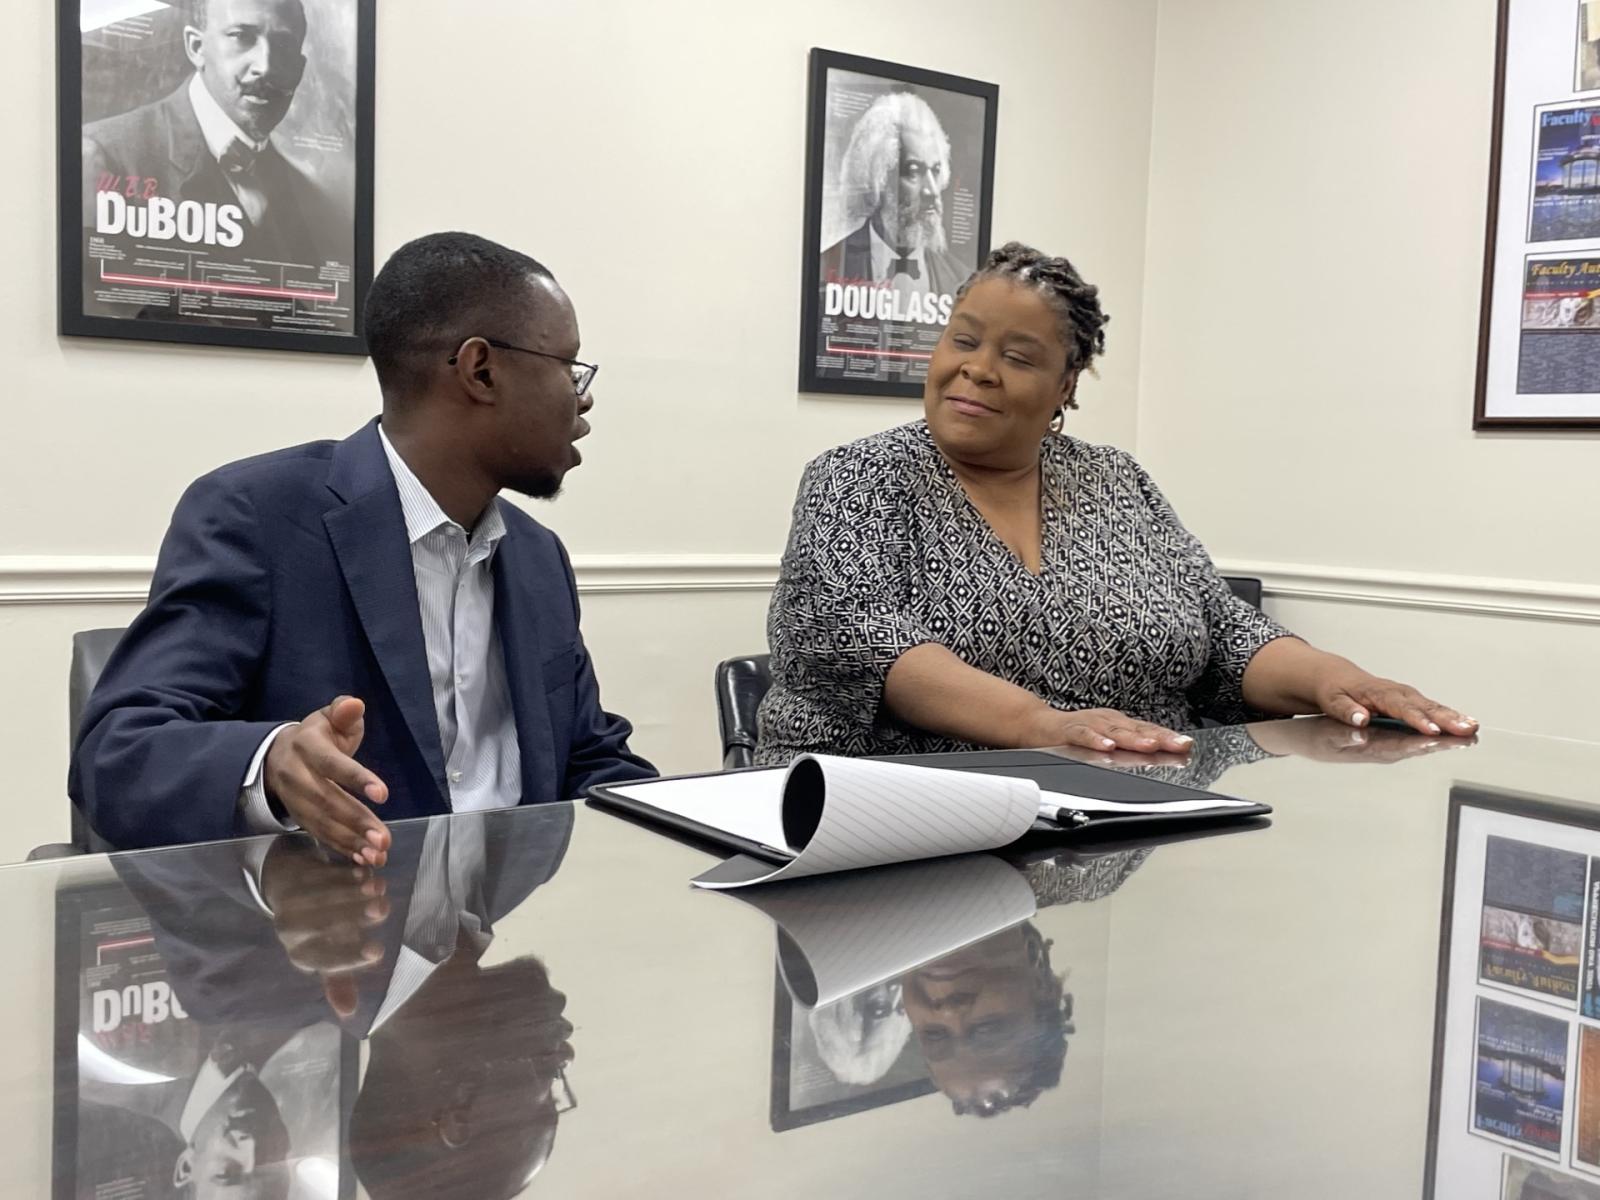 Melanie Carter, Ph.D., sits with HBCU Center Fellow Magana Kabugi, Ph.D. to discuss ideas surrounding his research work. (Source: HBCU Center for Research, Leadership, and Policy)